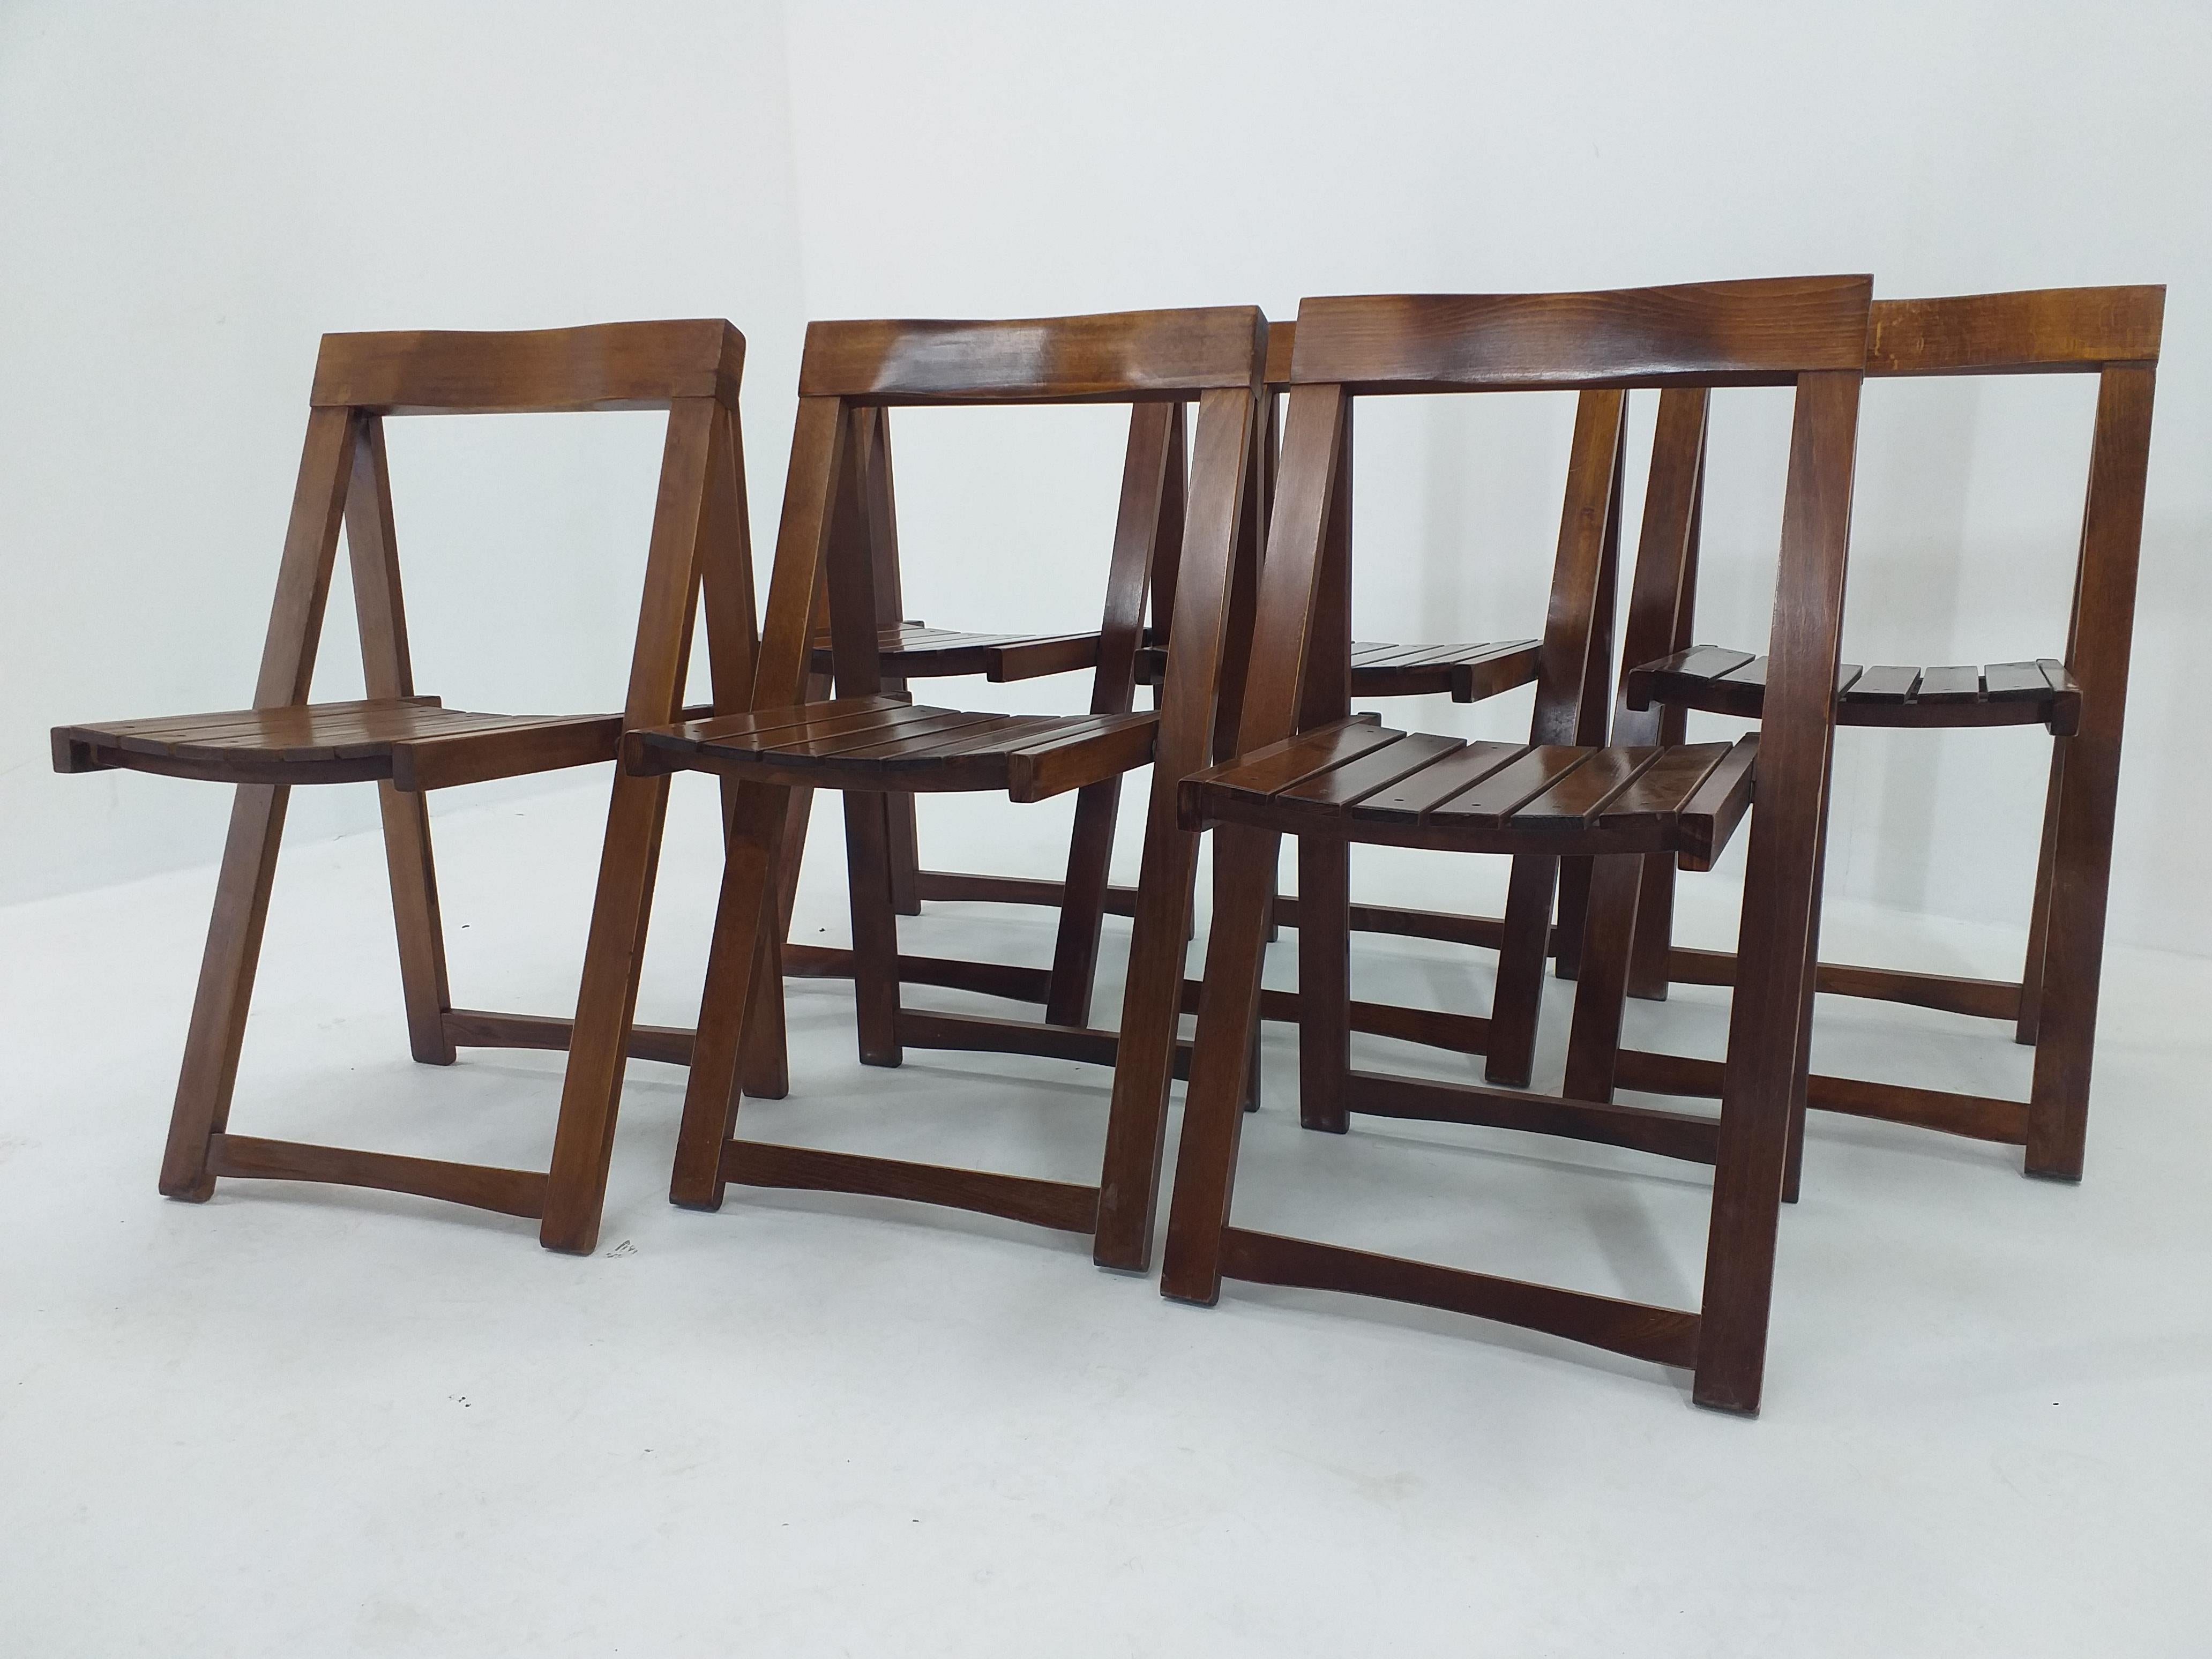 Set of Six Mid Century Folding Chairs Aldo Jacober for Alberto Bazzani, 1960s For Sale 3